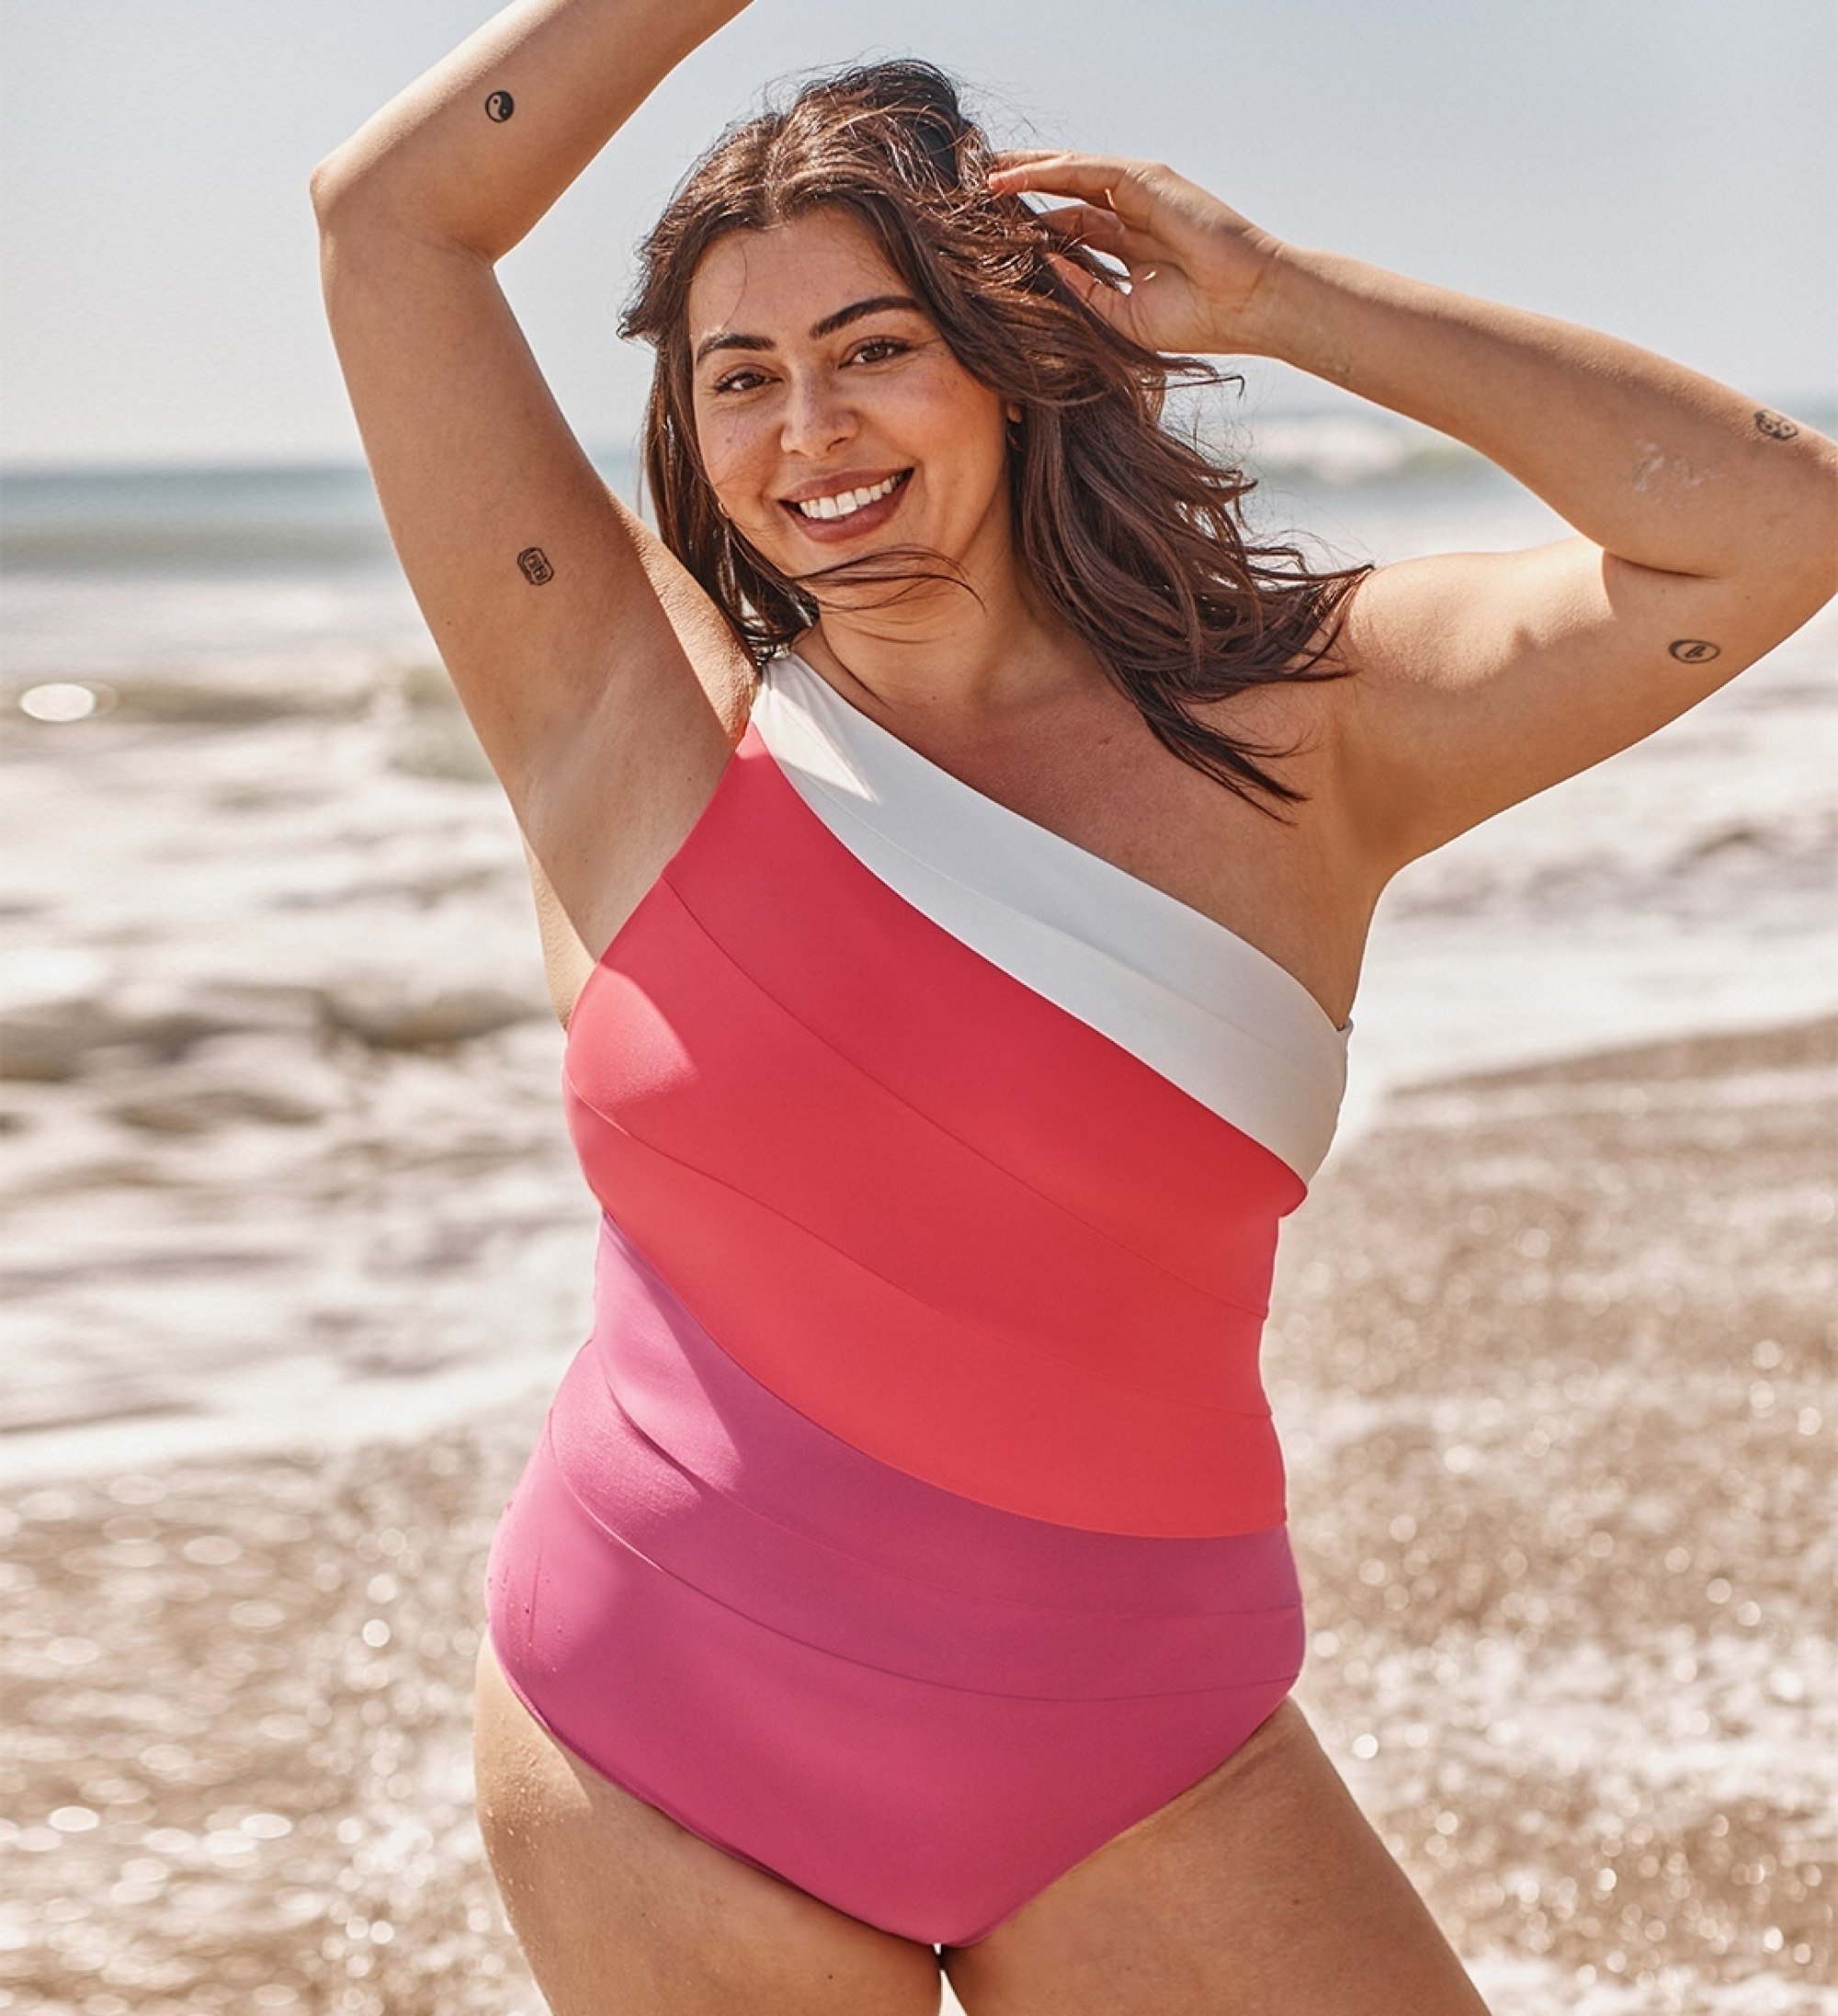 The right swimsuit for you? It's whatever you like regardless of